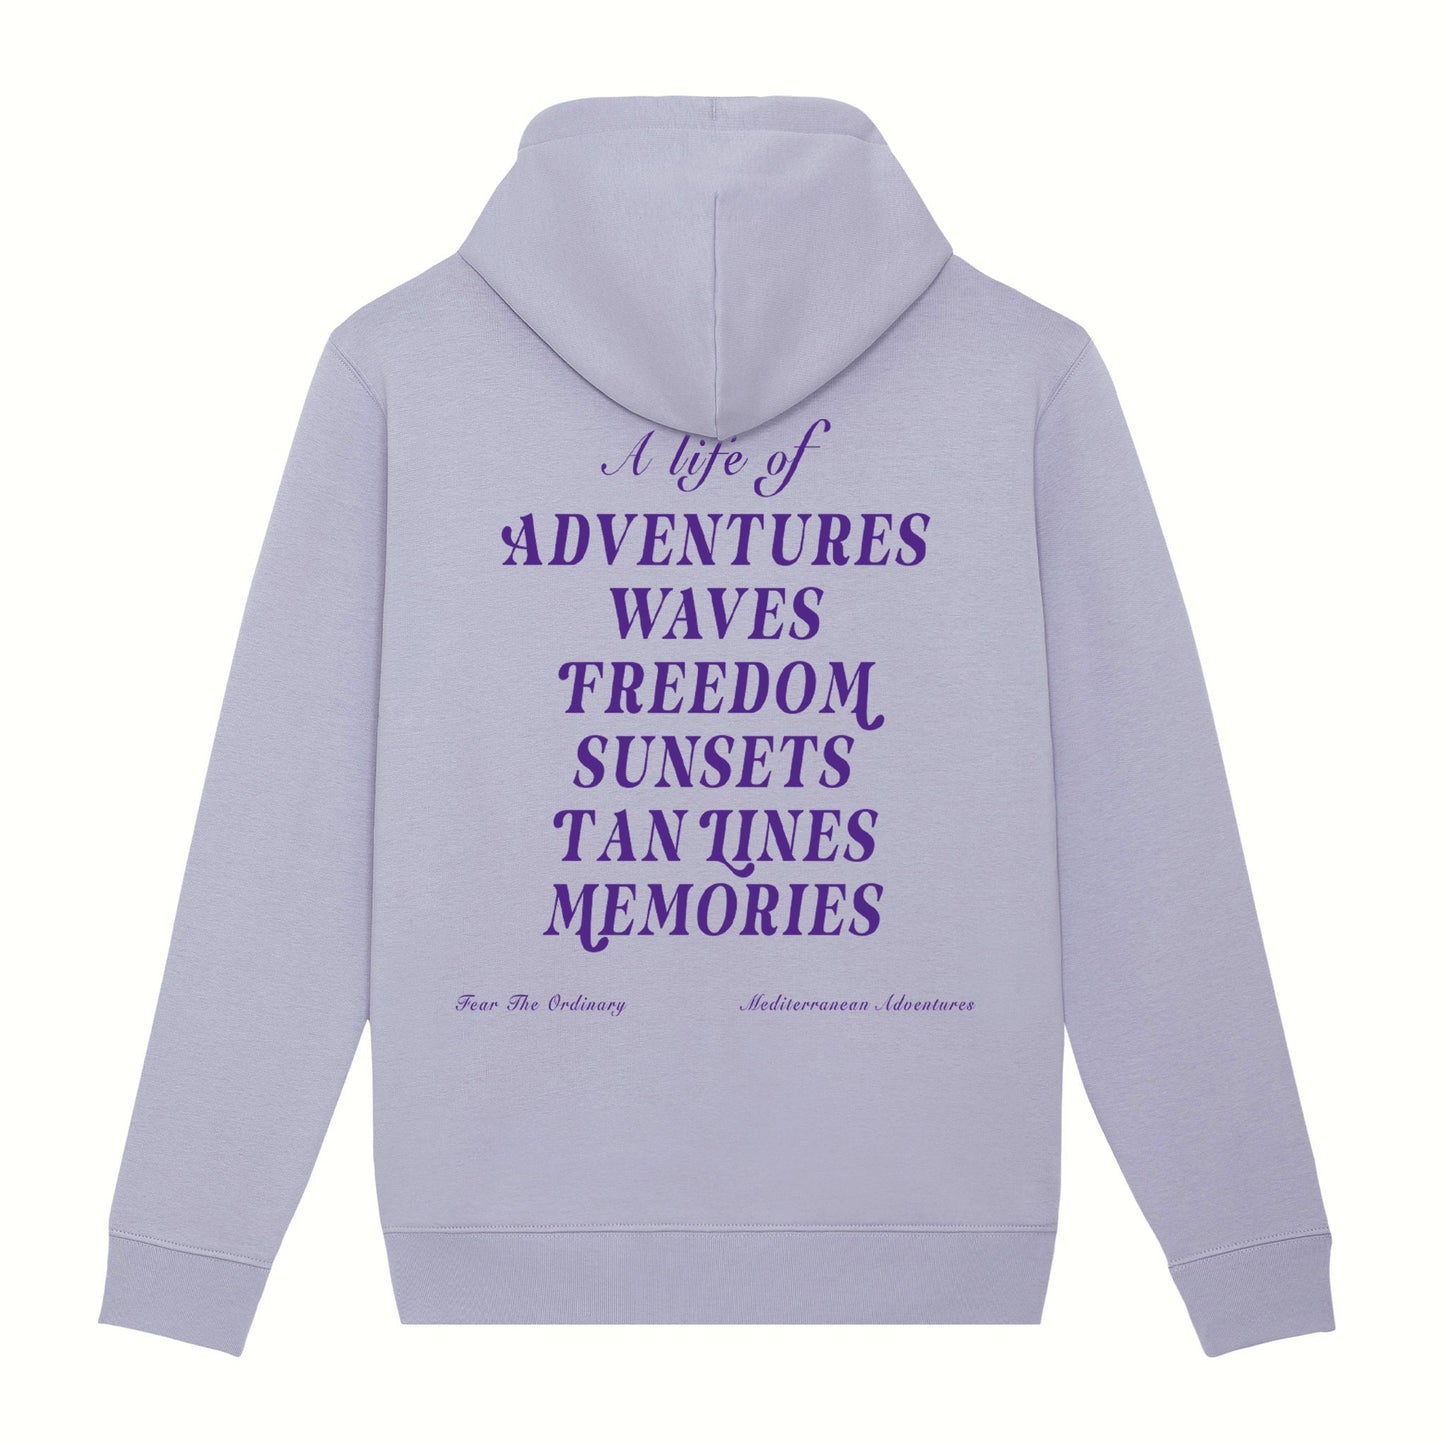 Fear the ordinary lavender premium organic cotton hoodie with indigo adventure inspired back print.